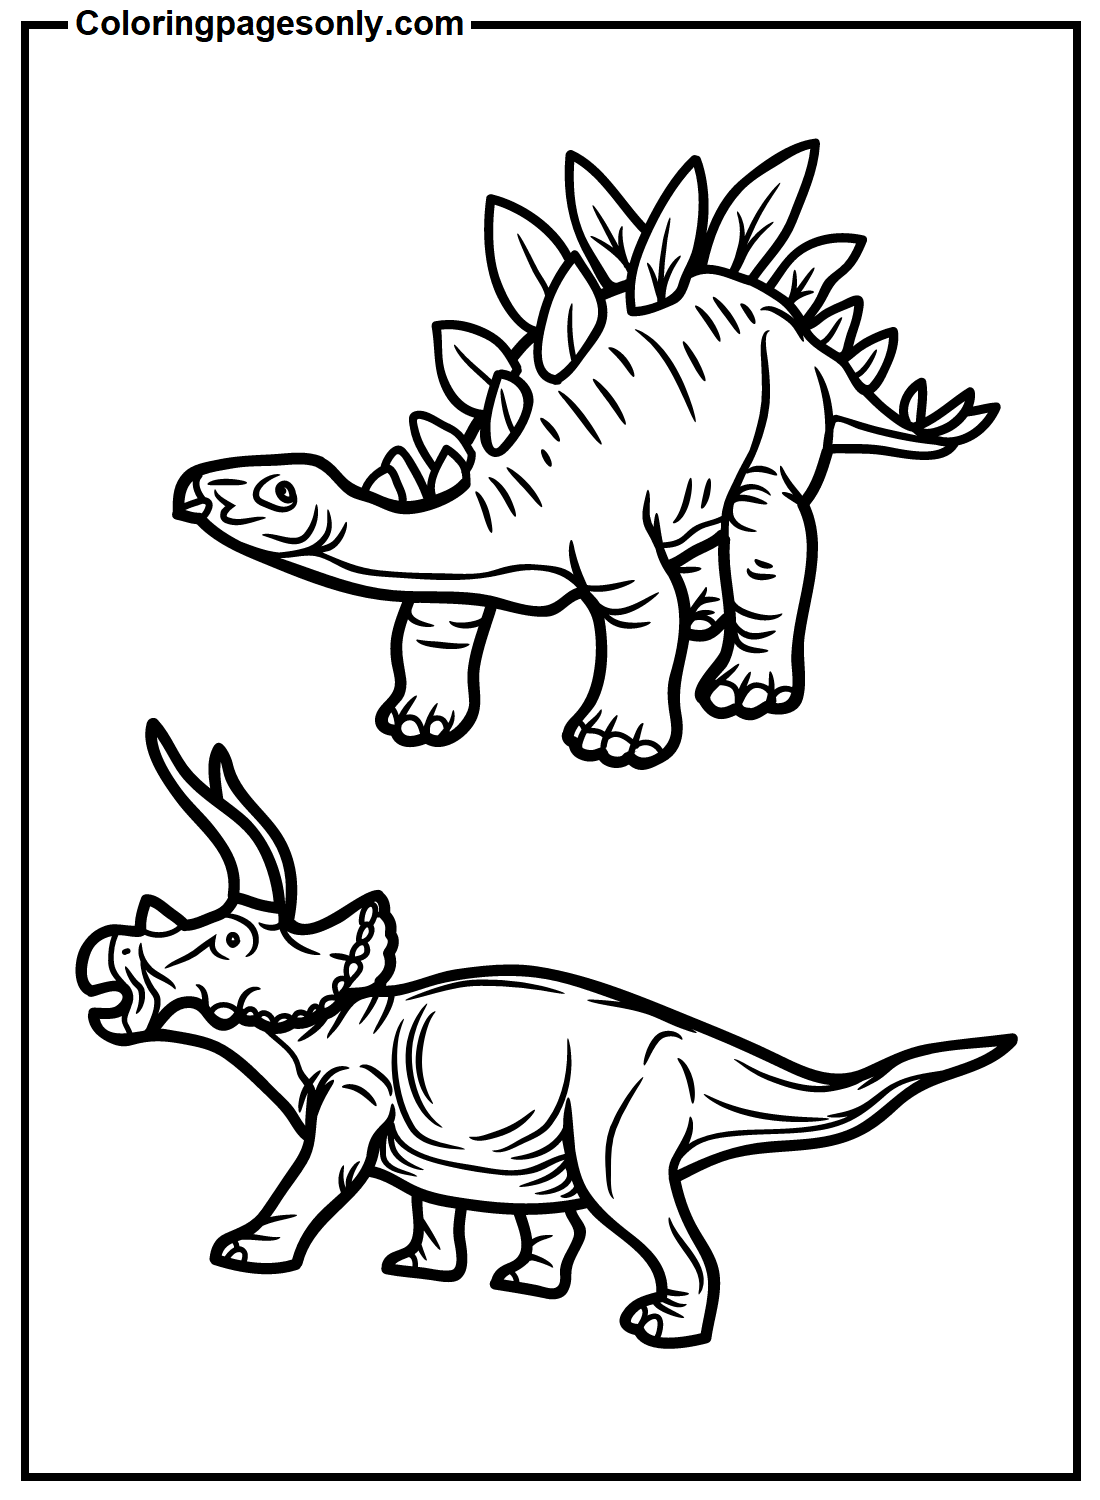 Triceratops and Stegosaurus from Triceratops